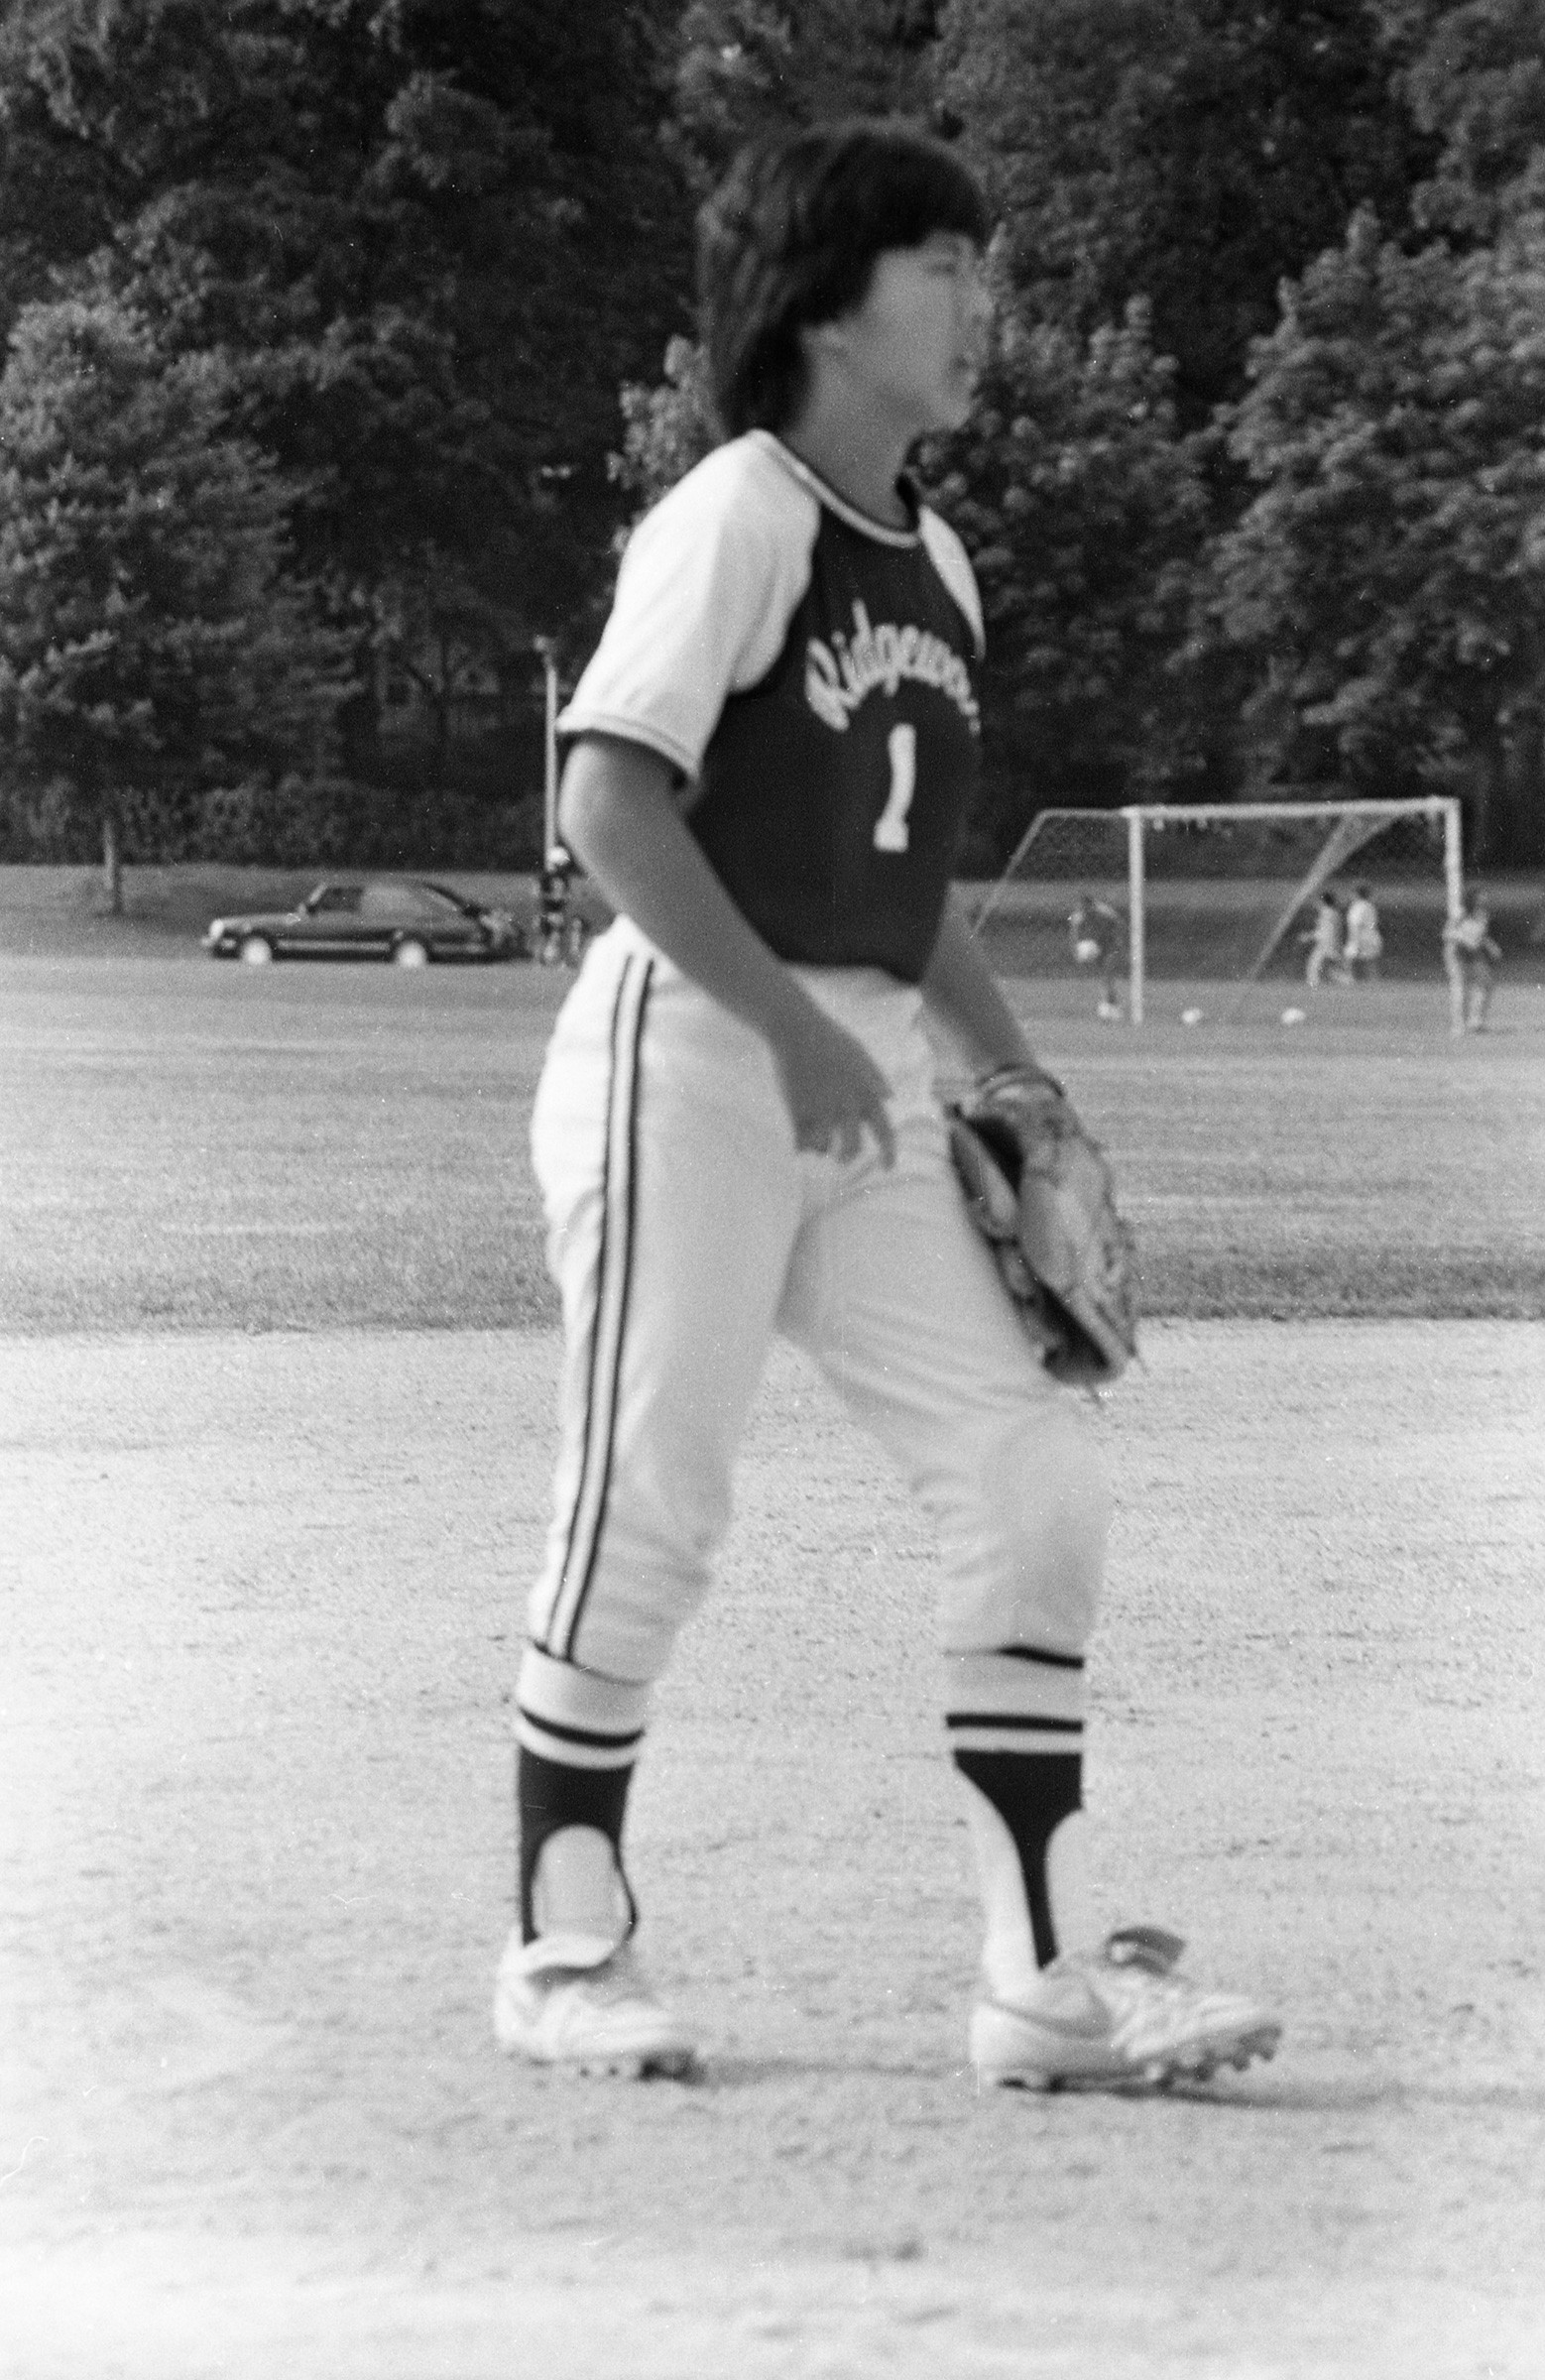 Ng playing softball at Ridgewood High School in 1986 (Mike Grattini—USA TODAY NETWORK/Reuters)